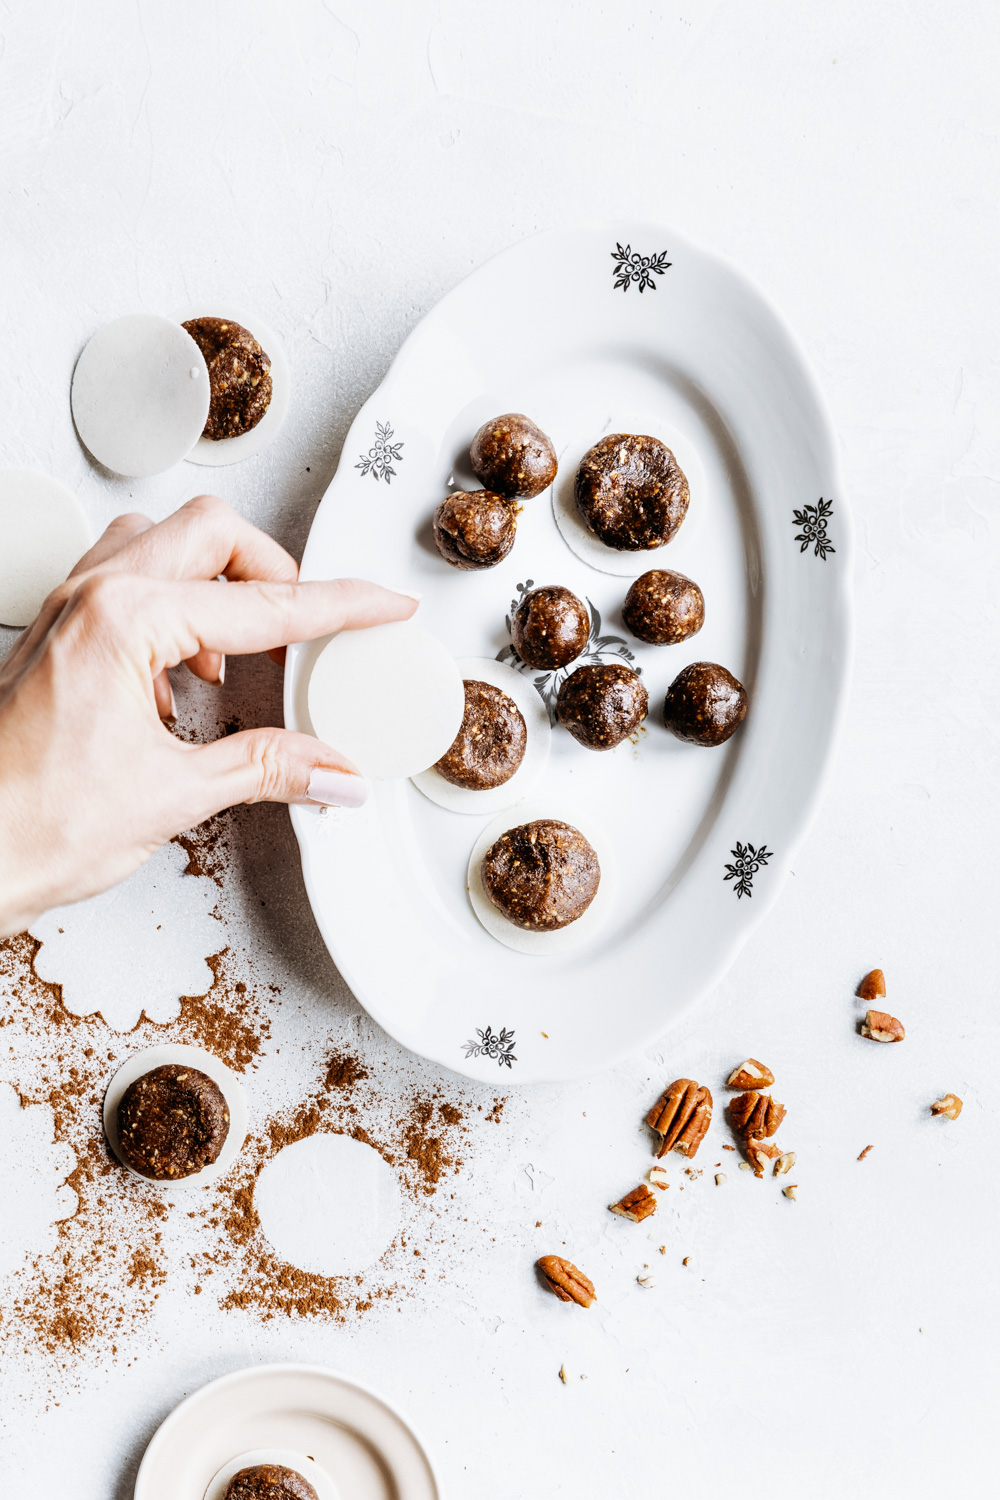 process making gingerbread bites on an oval white plate on a white backdrop and a hand holding a gingerbread